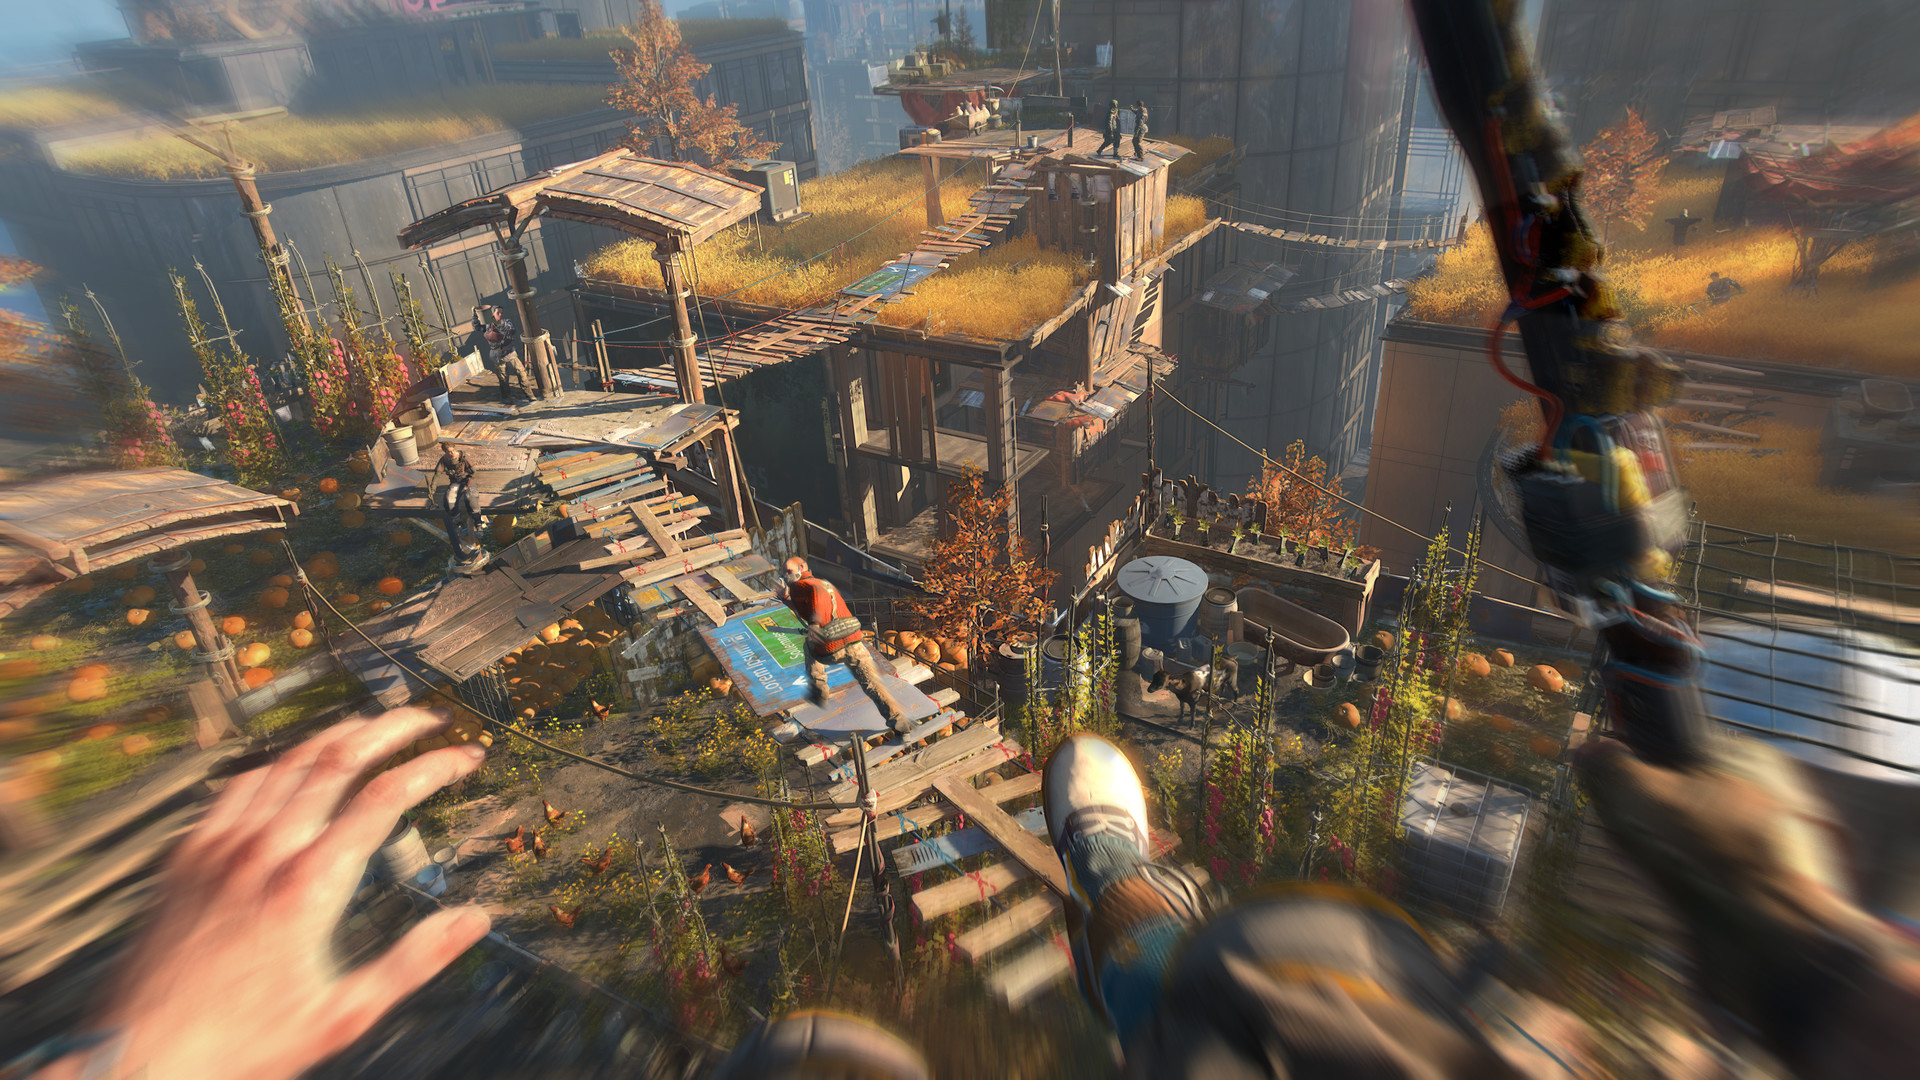 Dying Light 2 crossplay details and how to play online co-op with